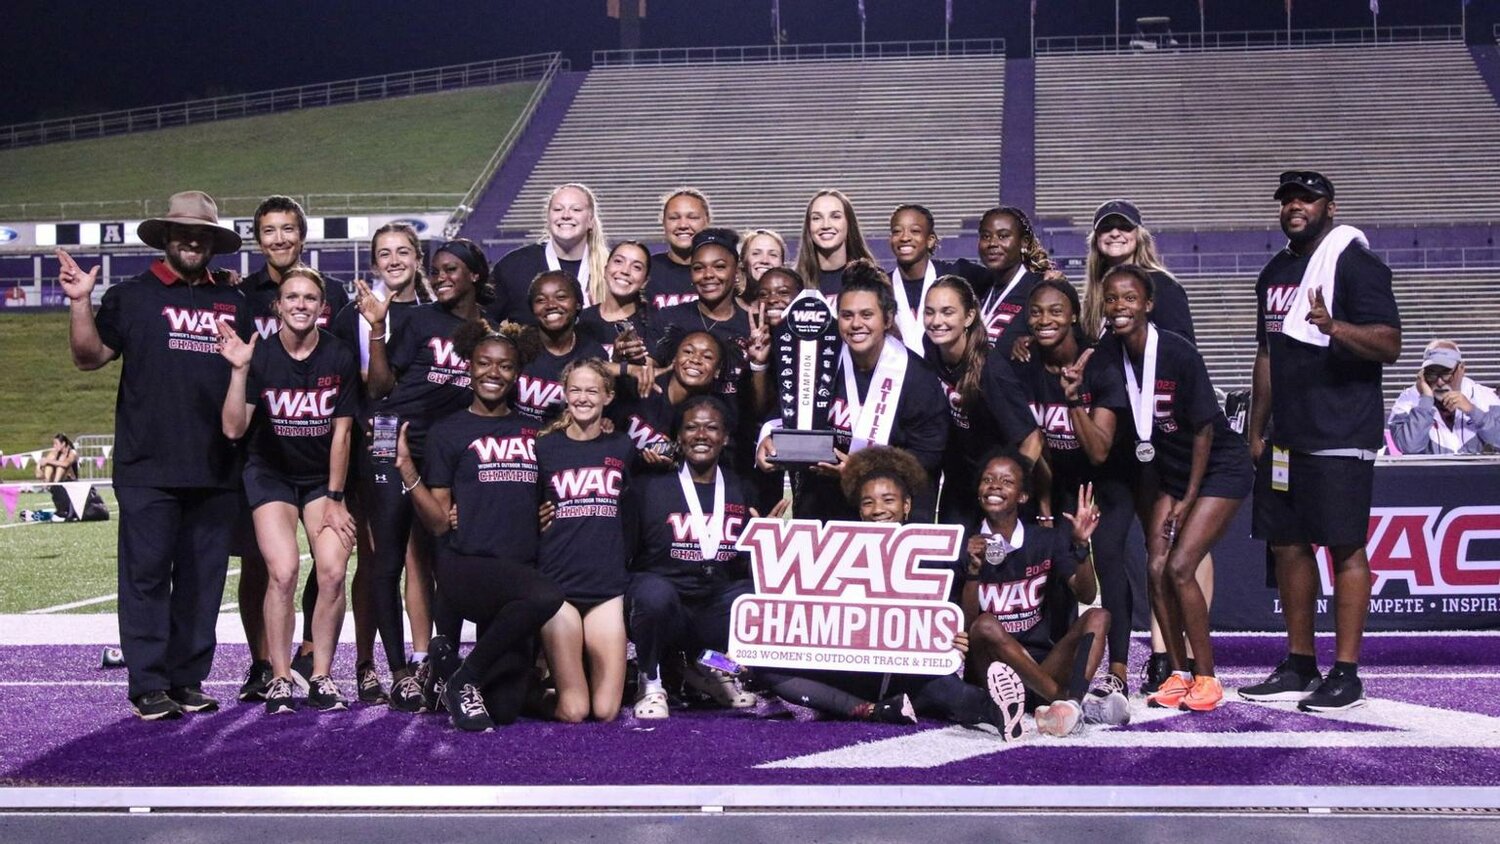 Competing in Nacogdoches, Texas, May 11-13, in the Western Athletic Conference Outdoor Track & Field championships, NM State took home the title.